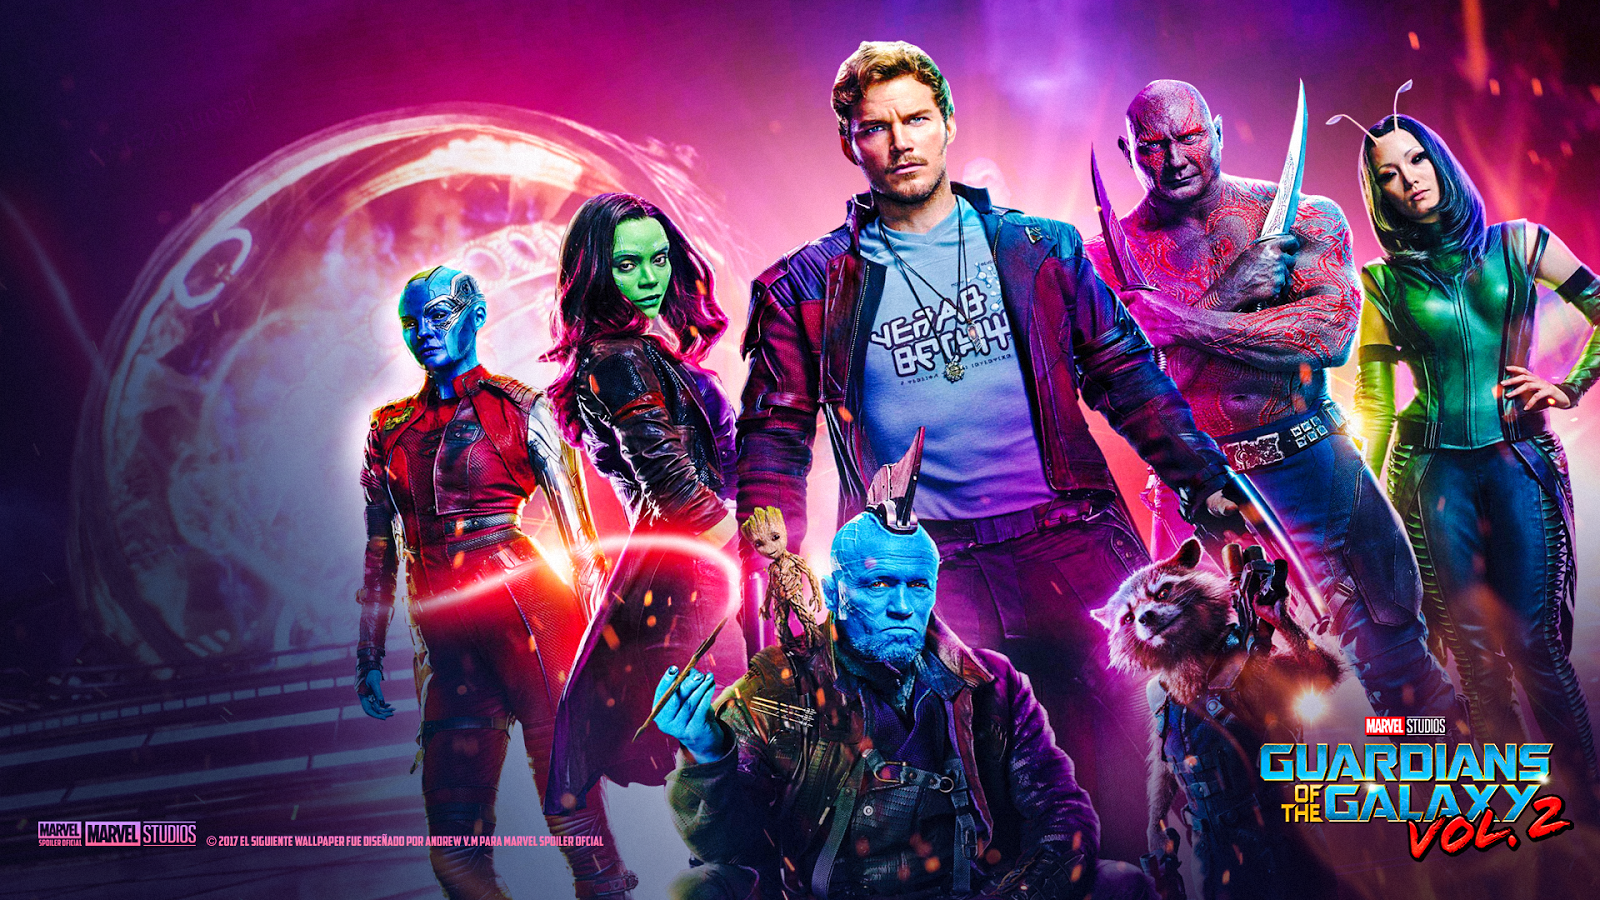 guardians of the galaxy wallpaper,performance,event,performing arts,fictional character,hero